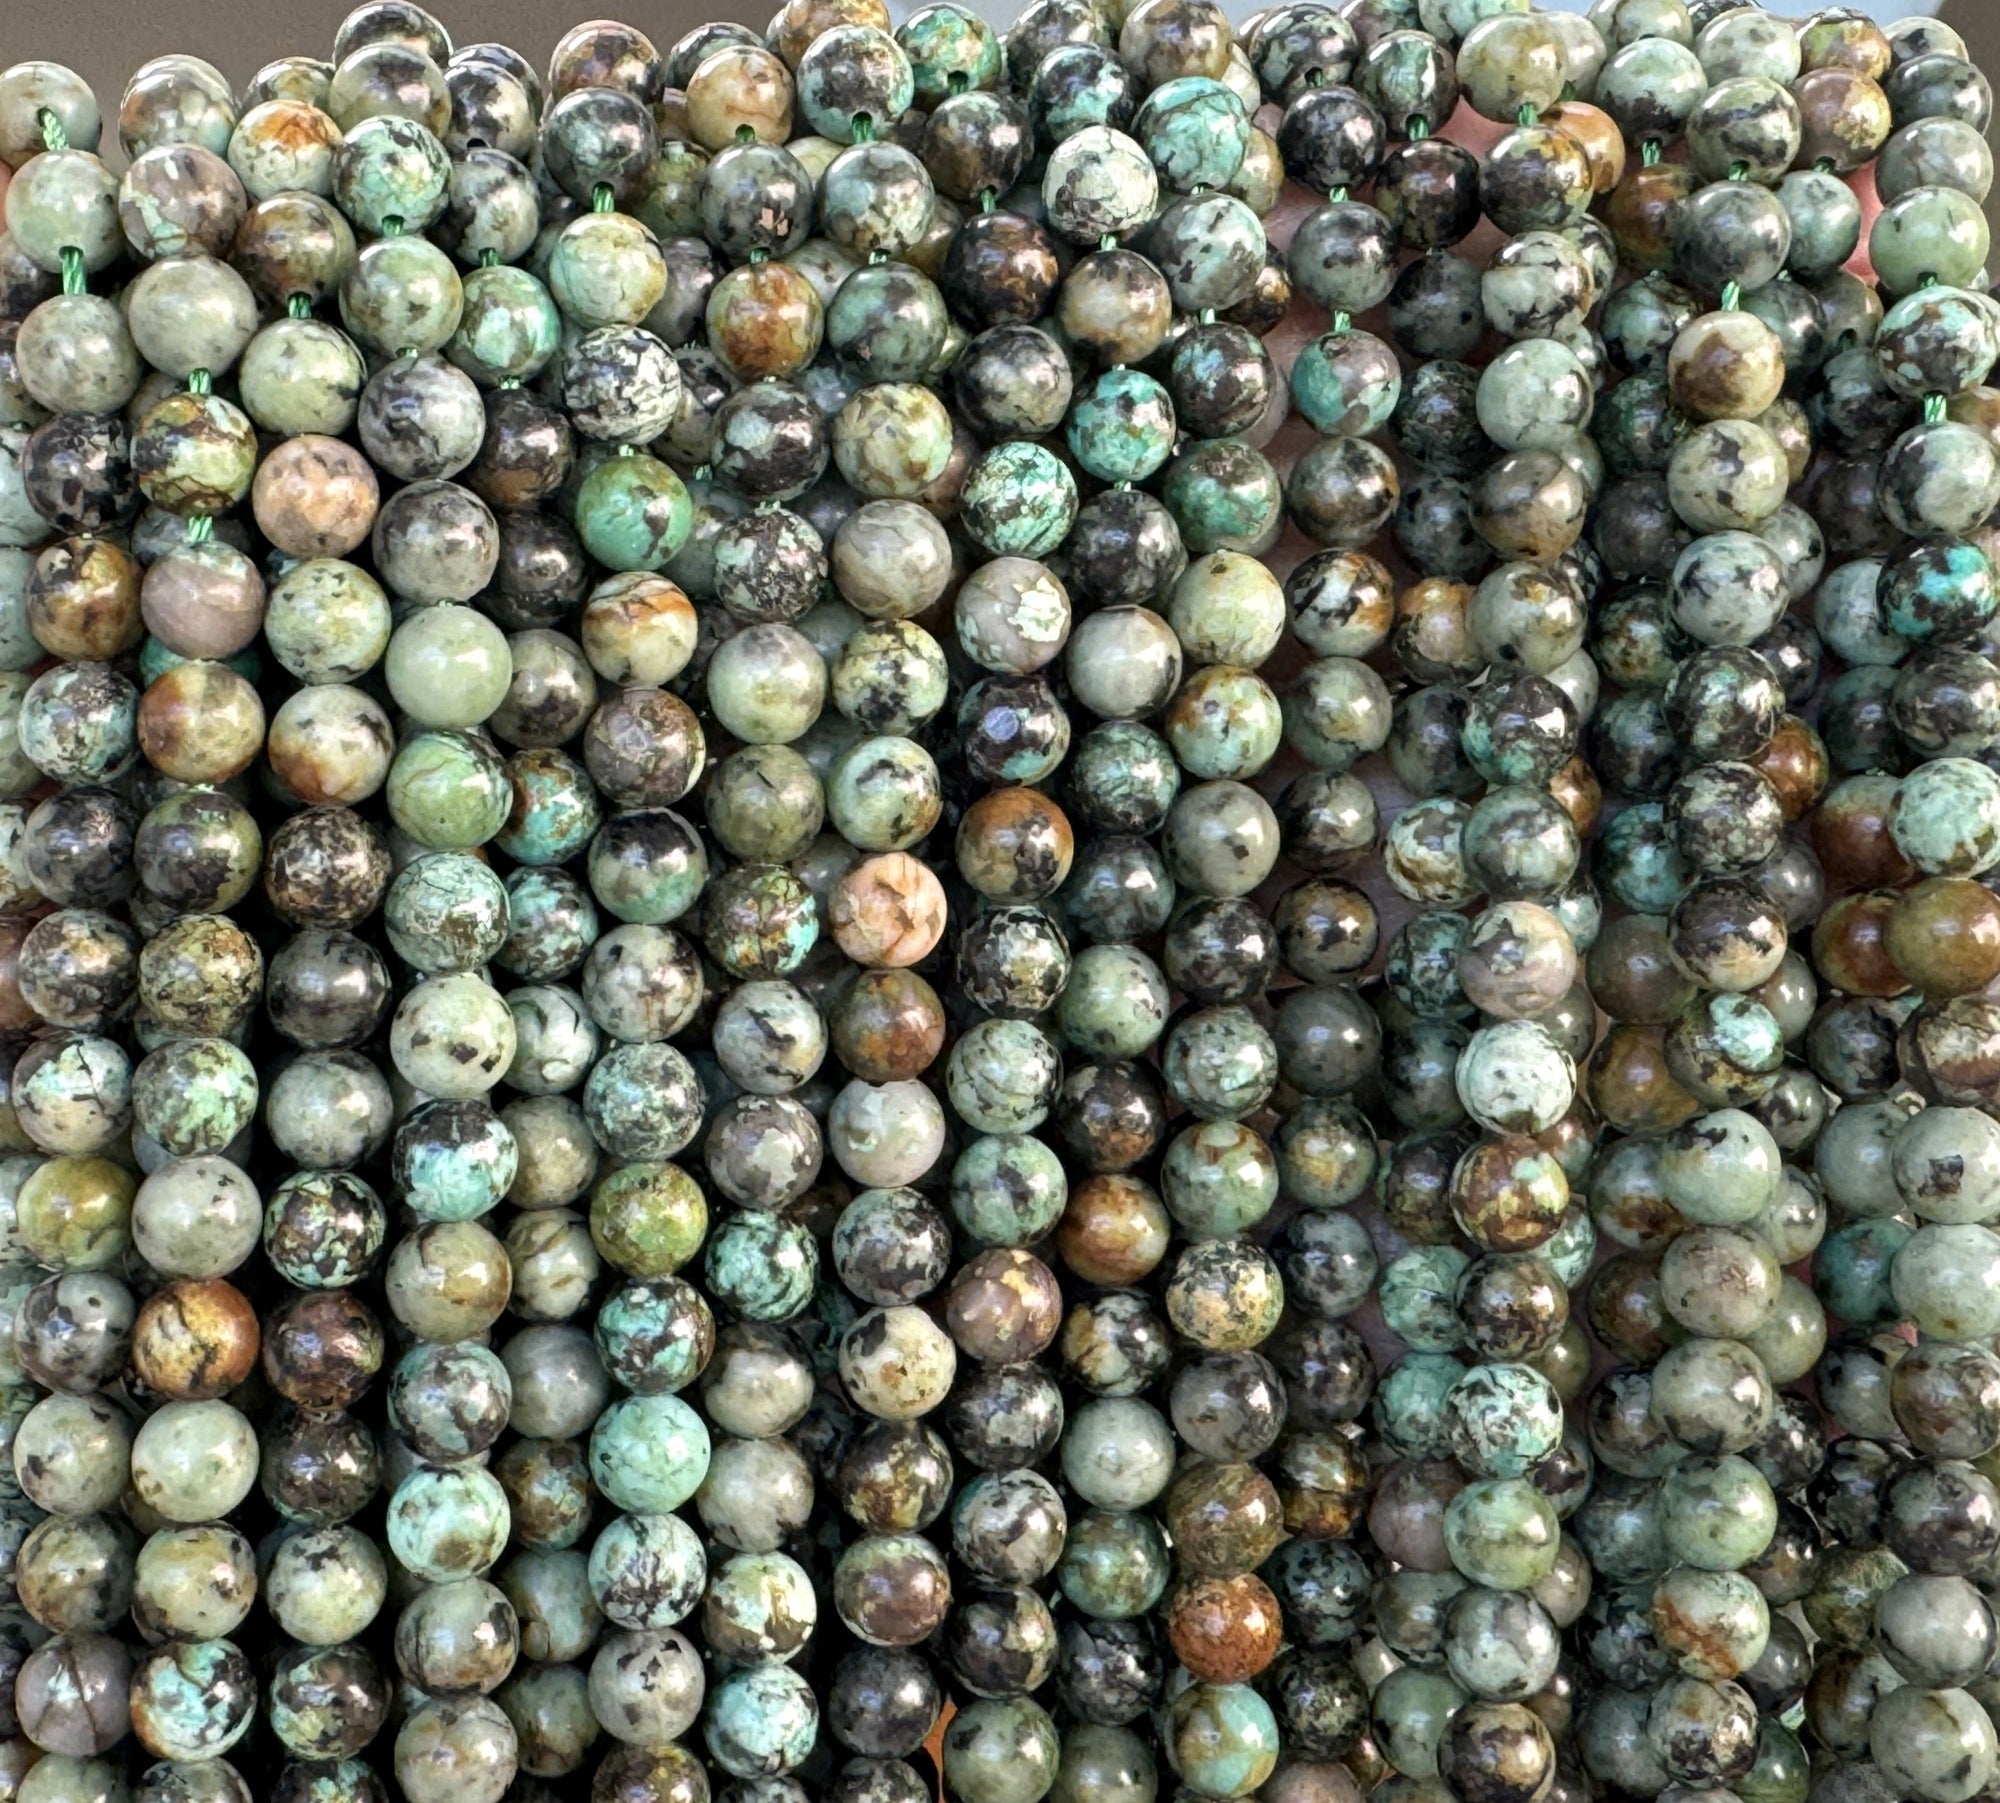 African Turquoise 6mm round natural gemstone beads 16" strand